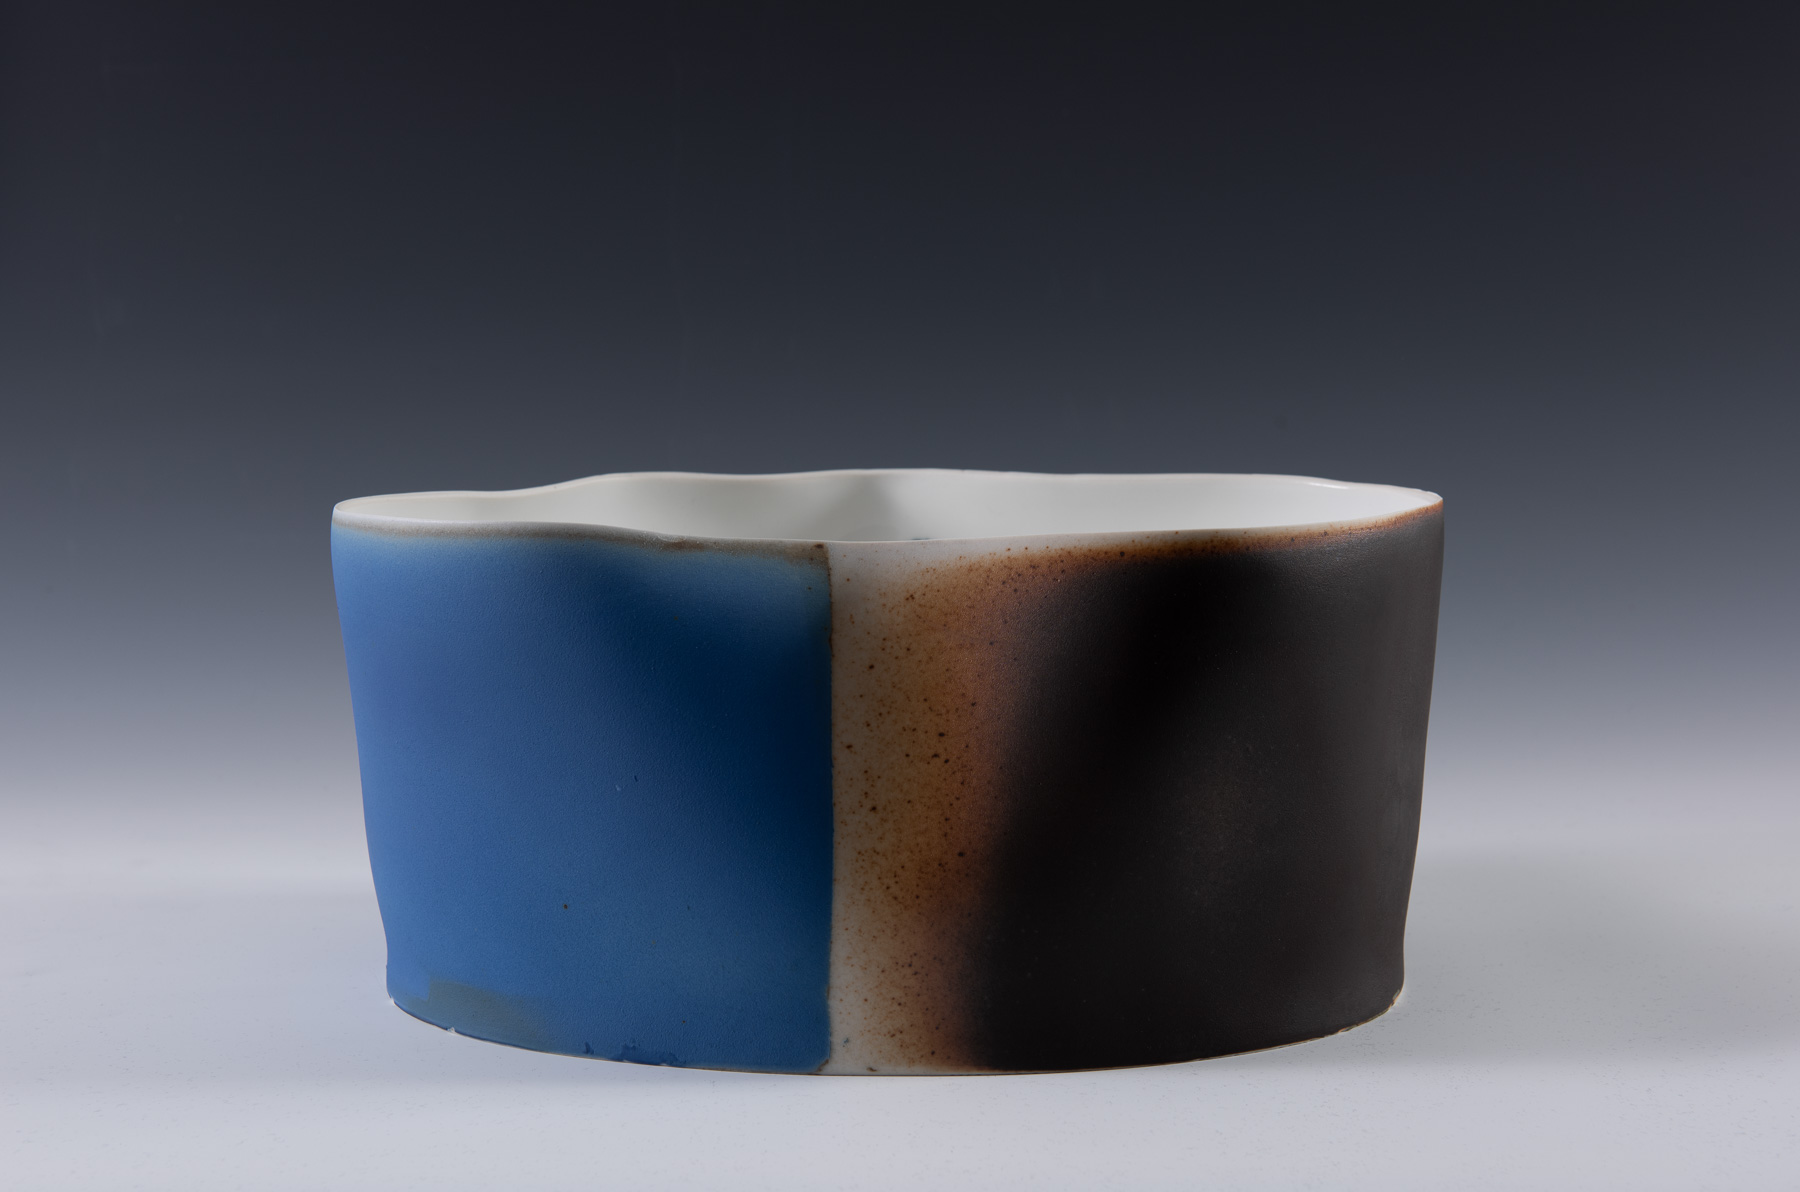 Heuch works with with cast porcelain and glazes